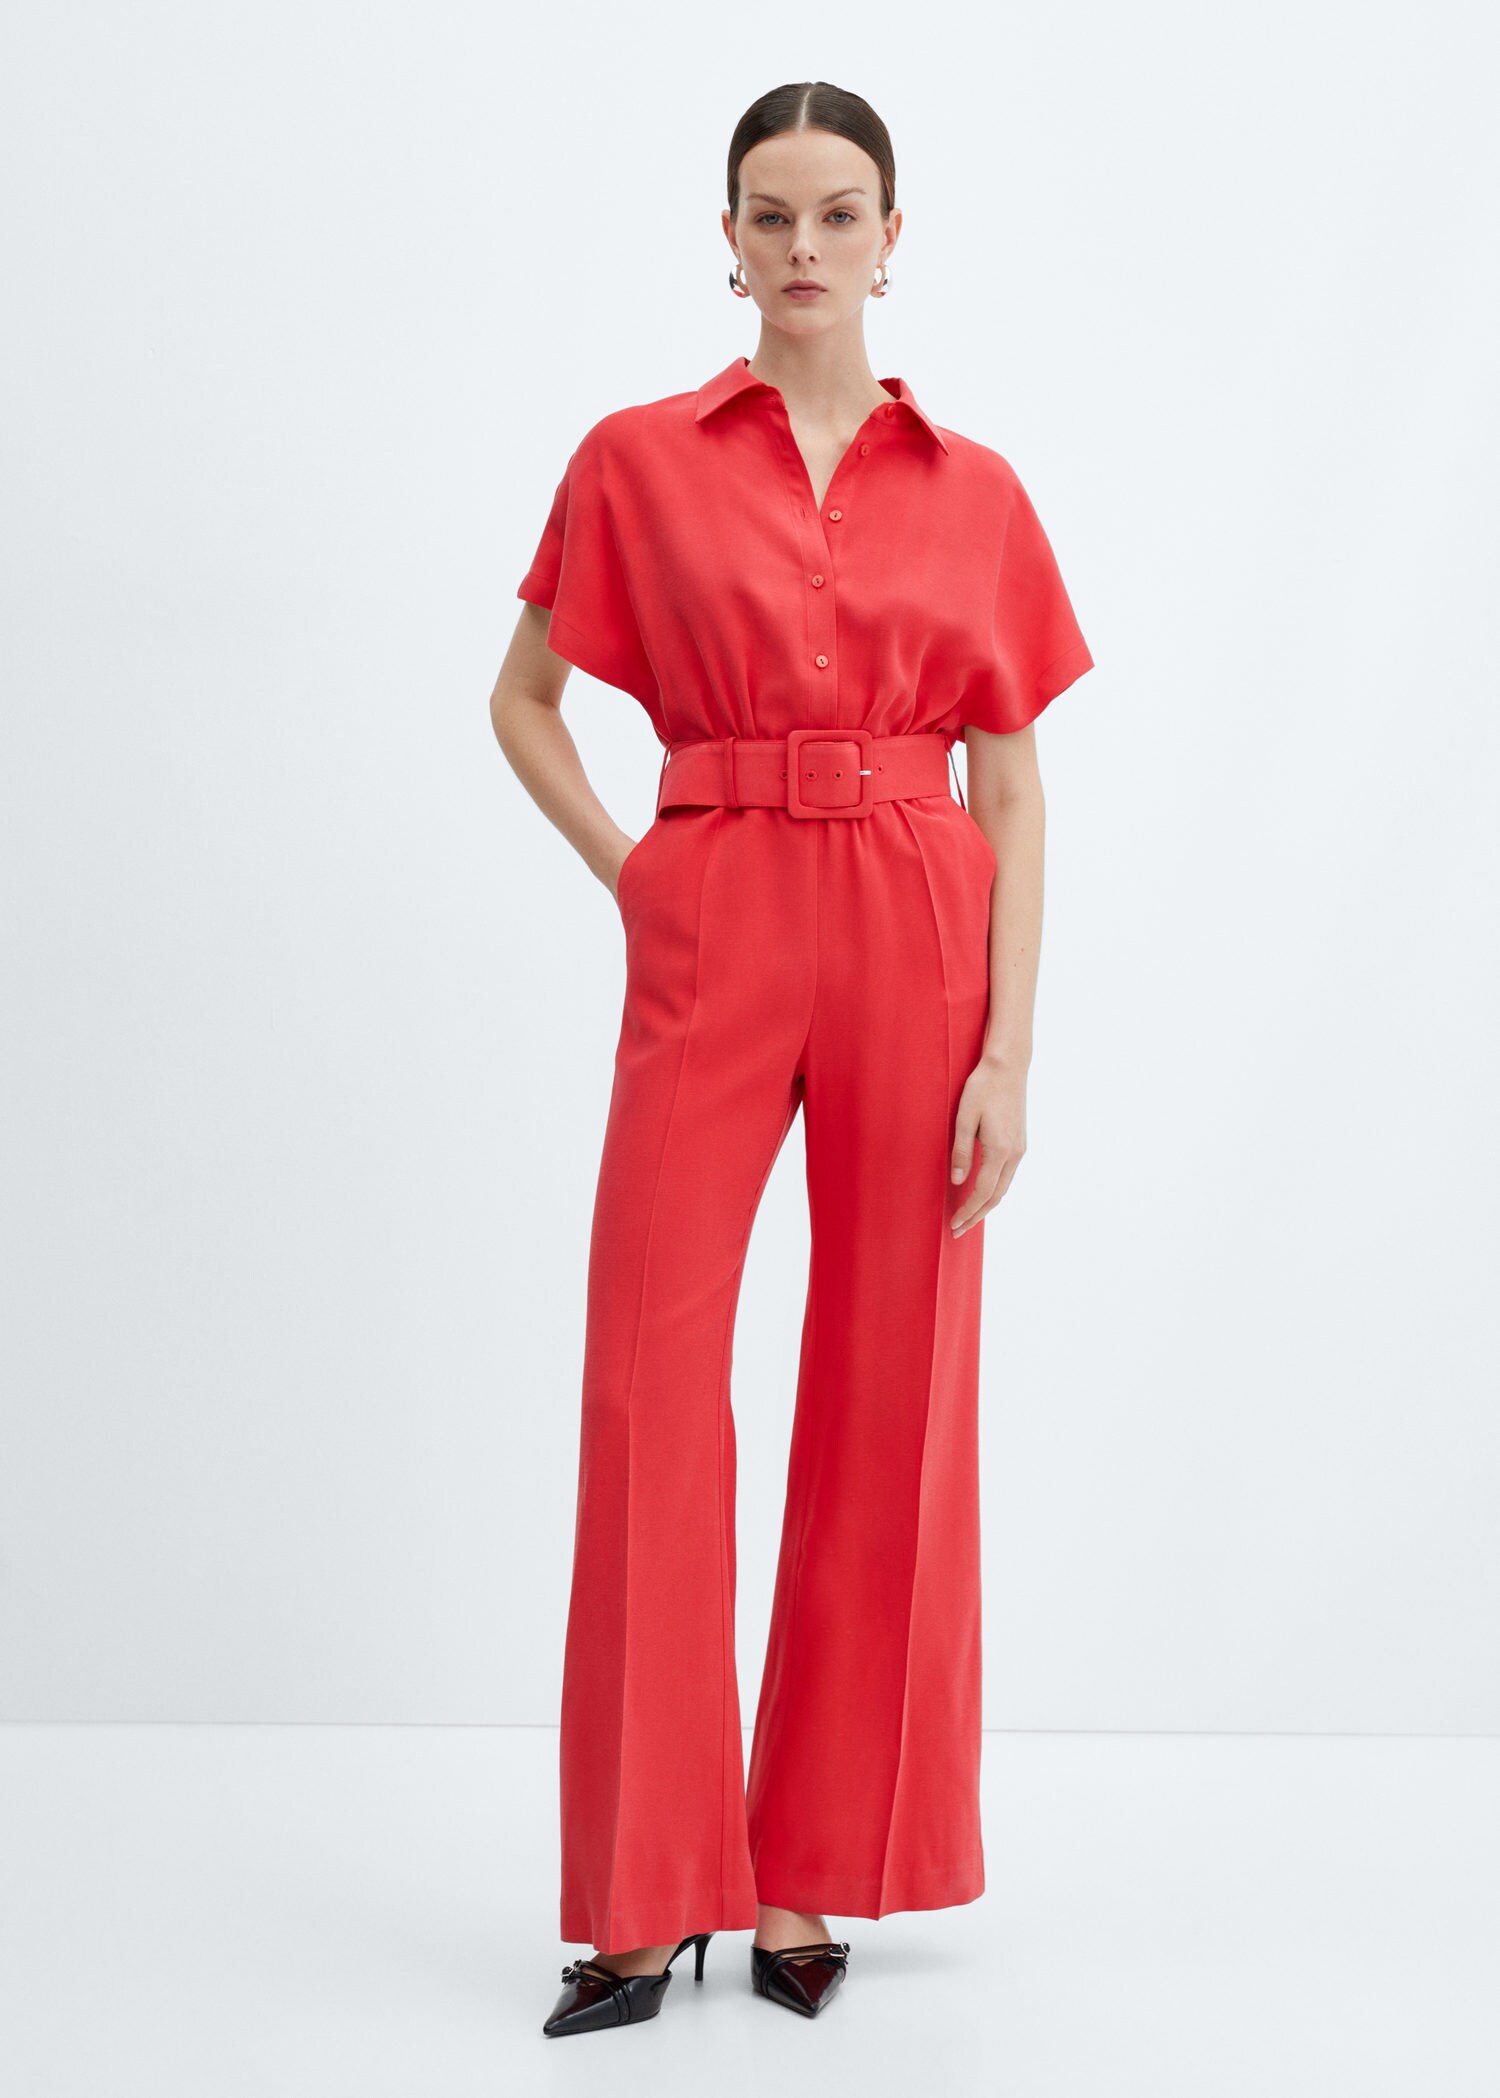 Versatile Open-back Jumpsuits Made in Canada | Miik | Sustainable fashion